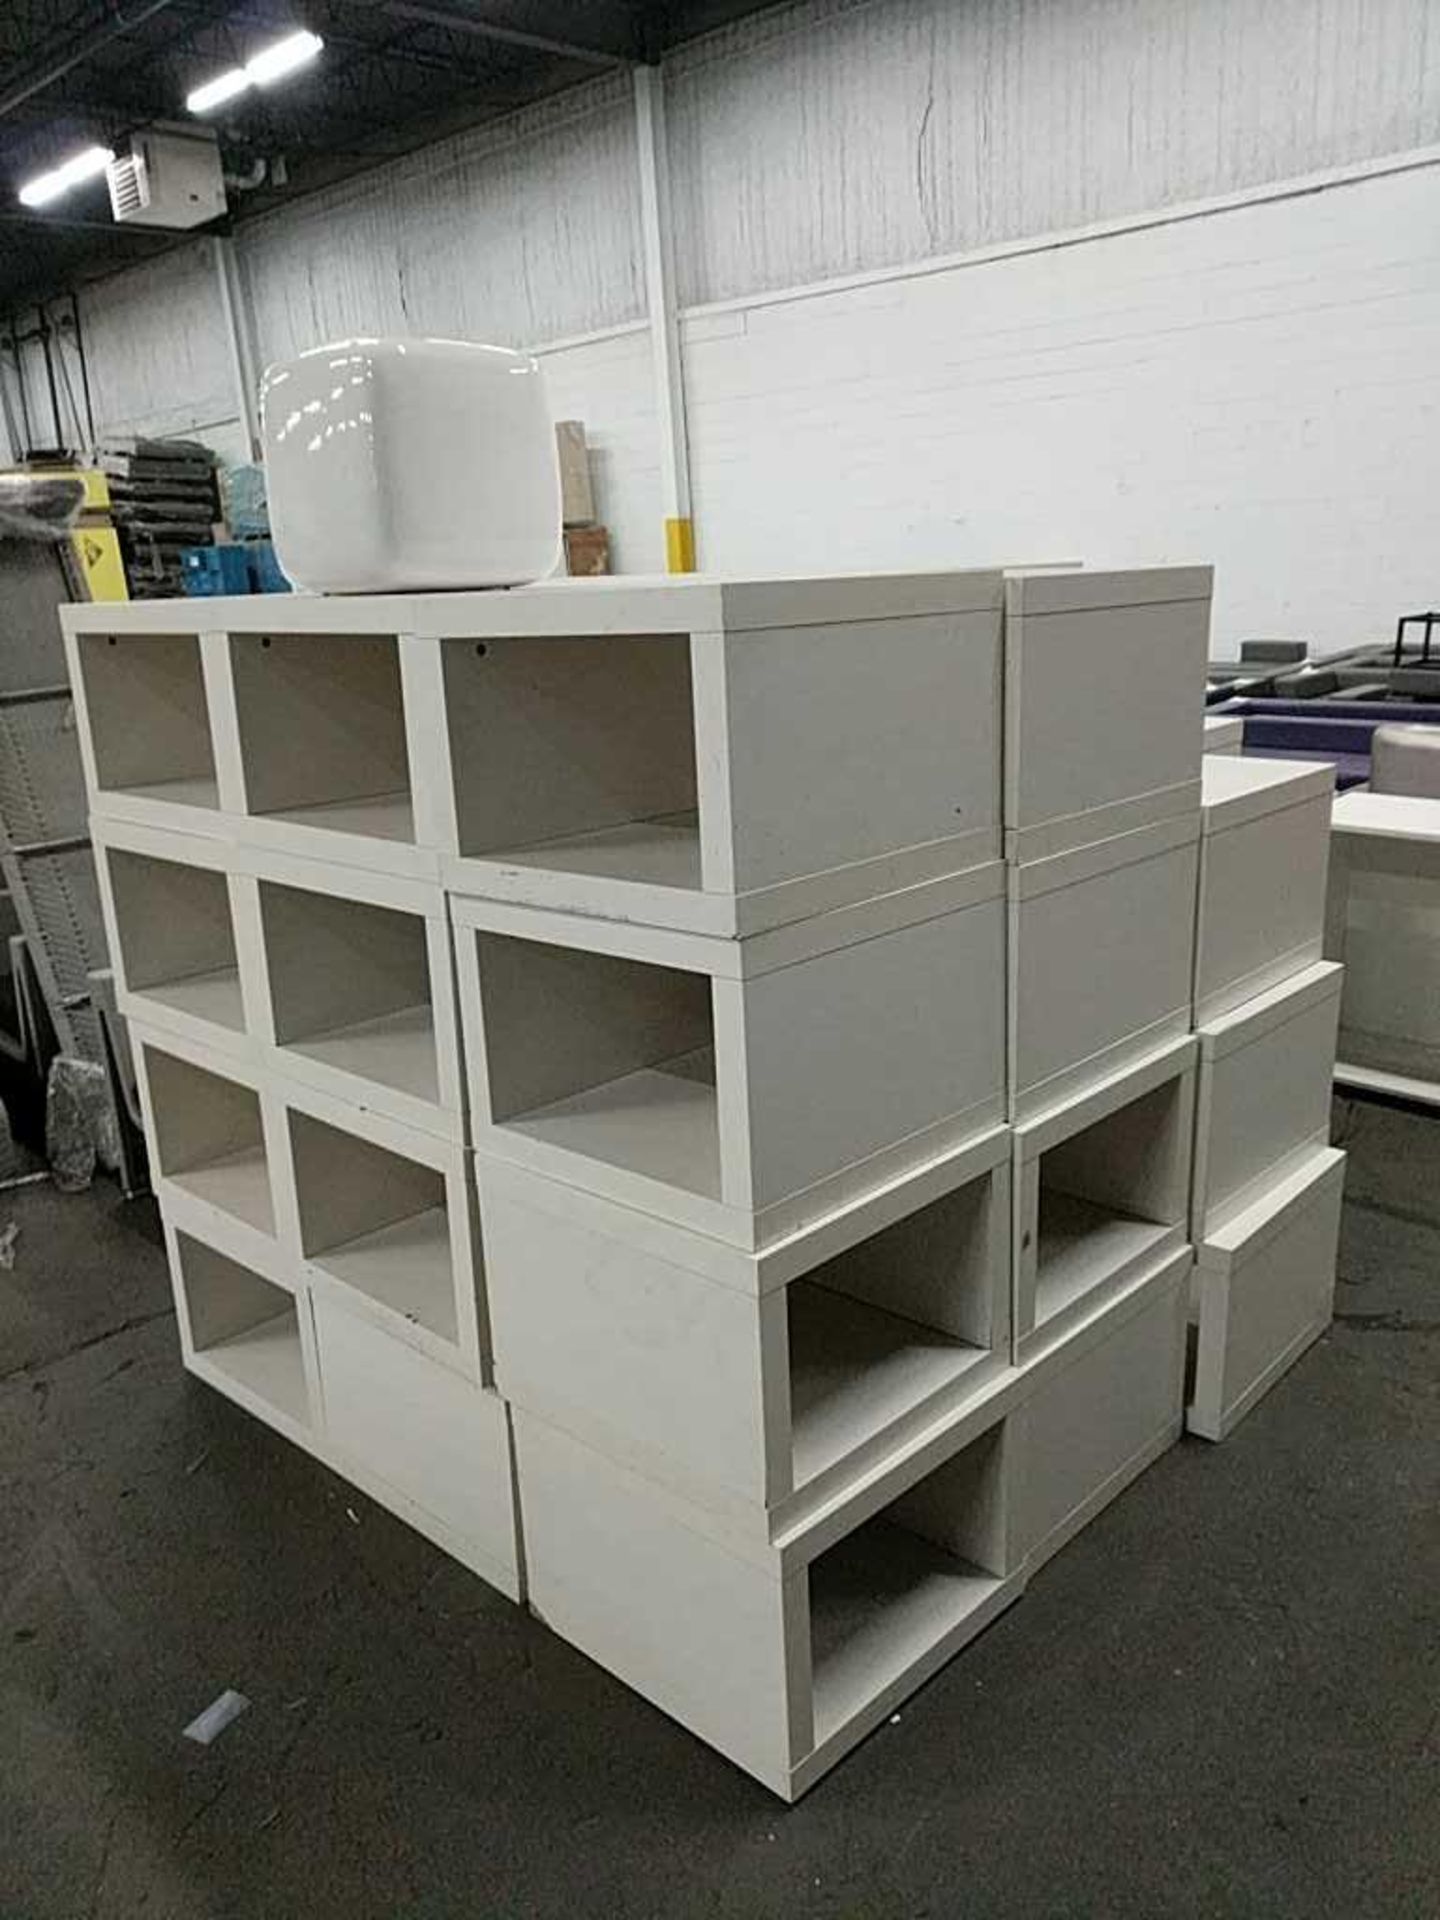 Lot of Formica Stacking Blocks - Image 2 of 2